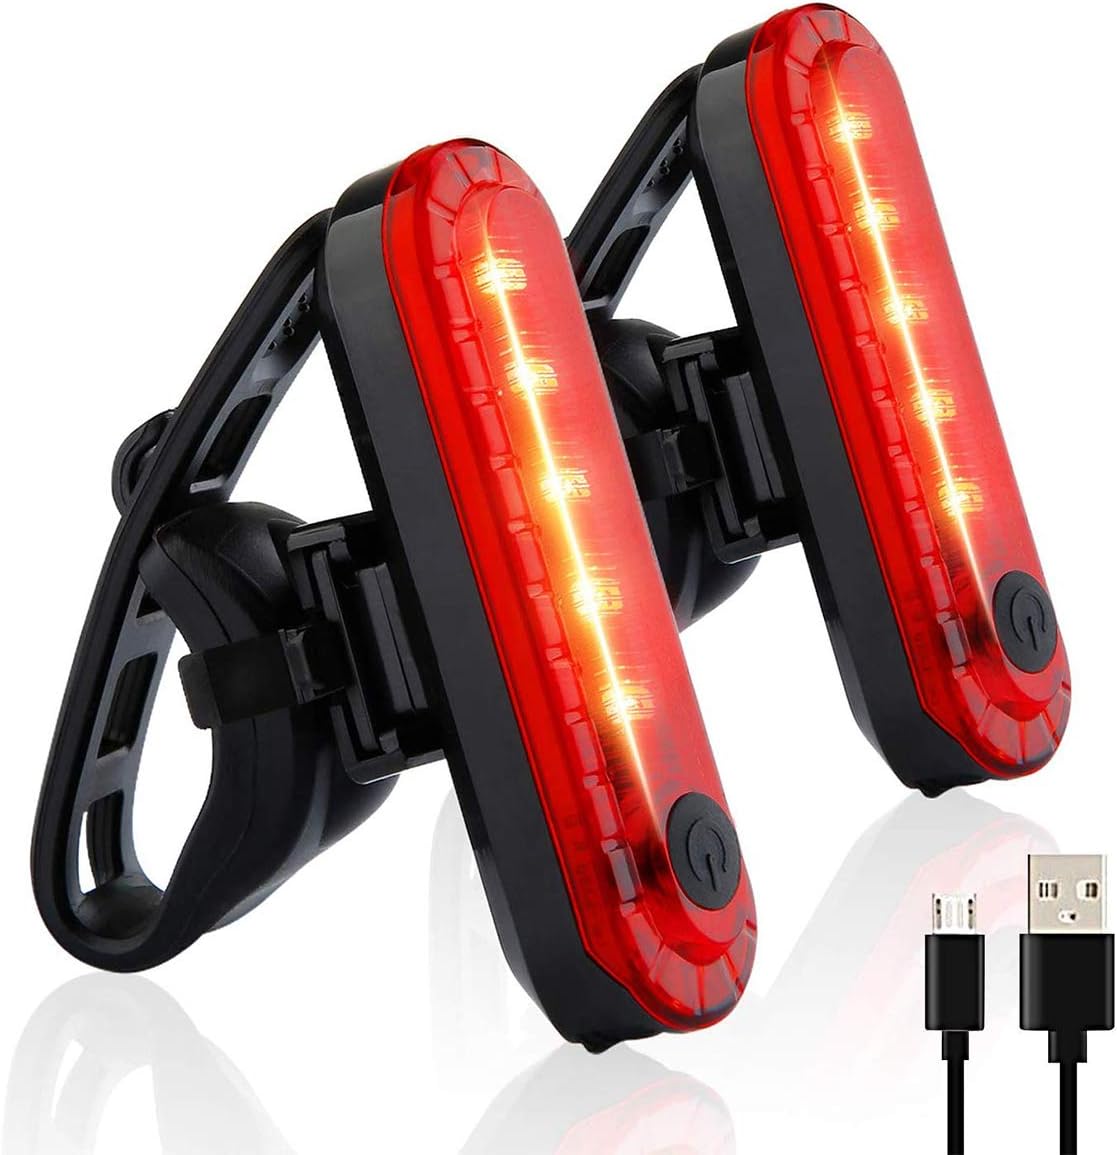 Yuwumin Bike Rear Light,USB Rechargeable LED Safety Lights for Bicycle Taillights,Ultra Bright Waterproof Cycling Tail Light,Red/Green/Blue 7 Light Modes Fits on Any Road Bike